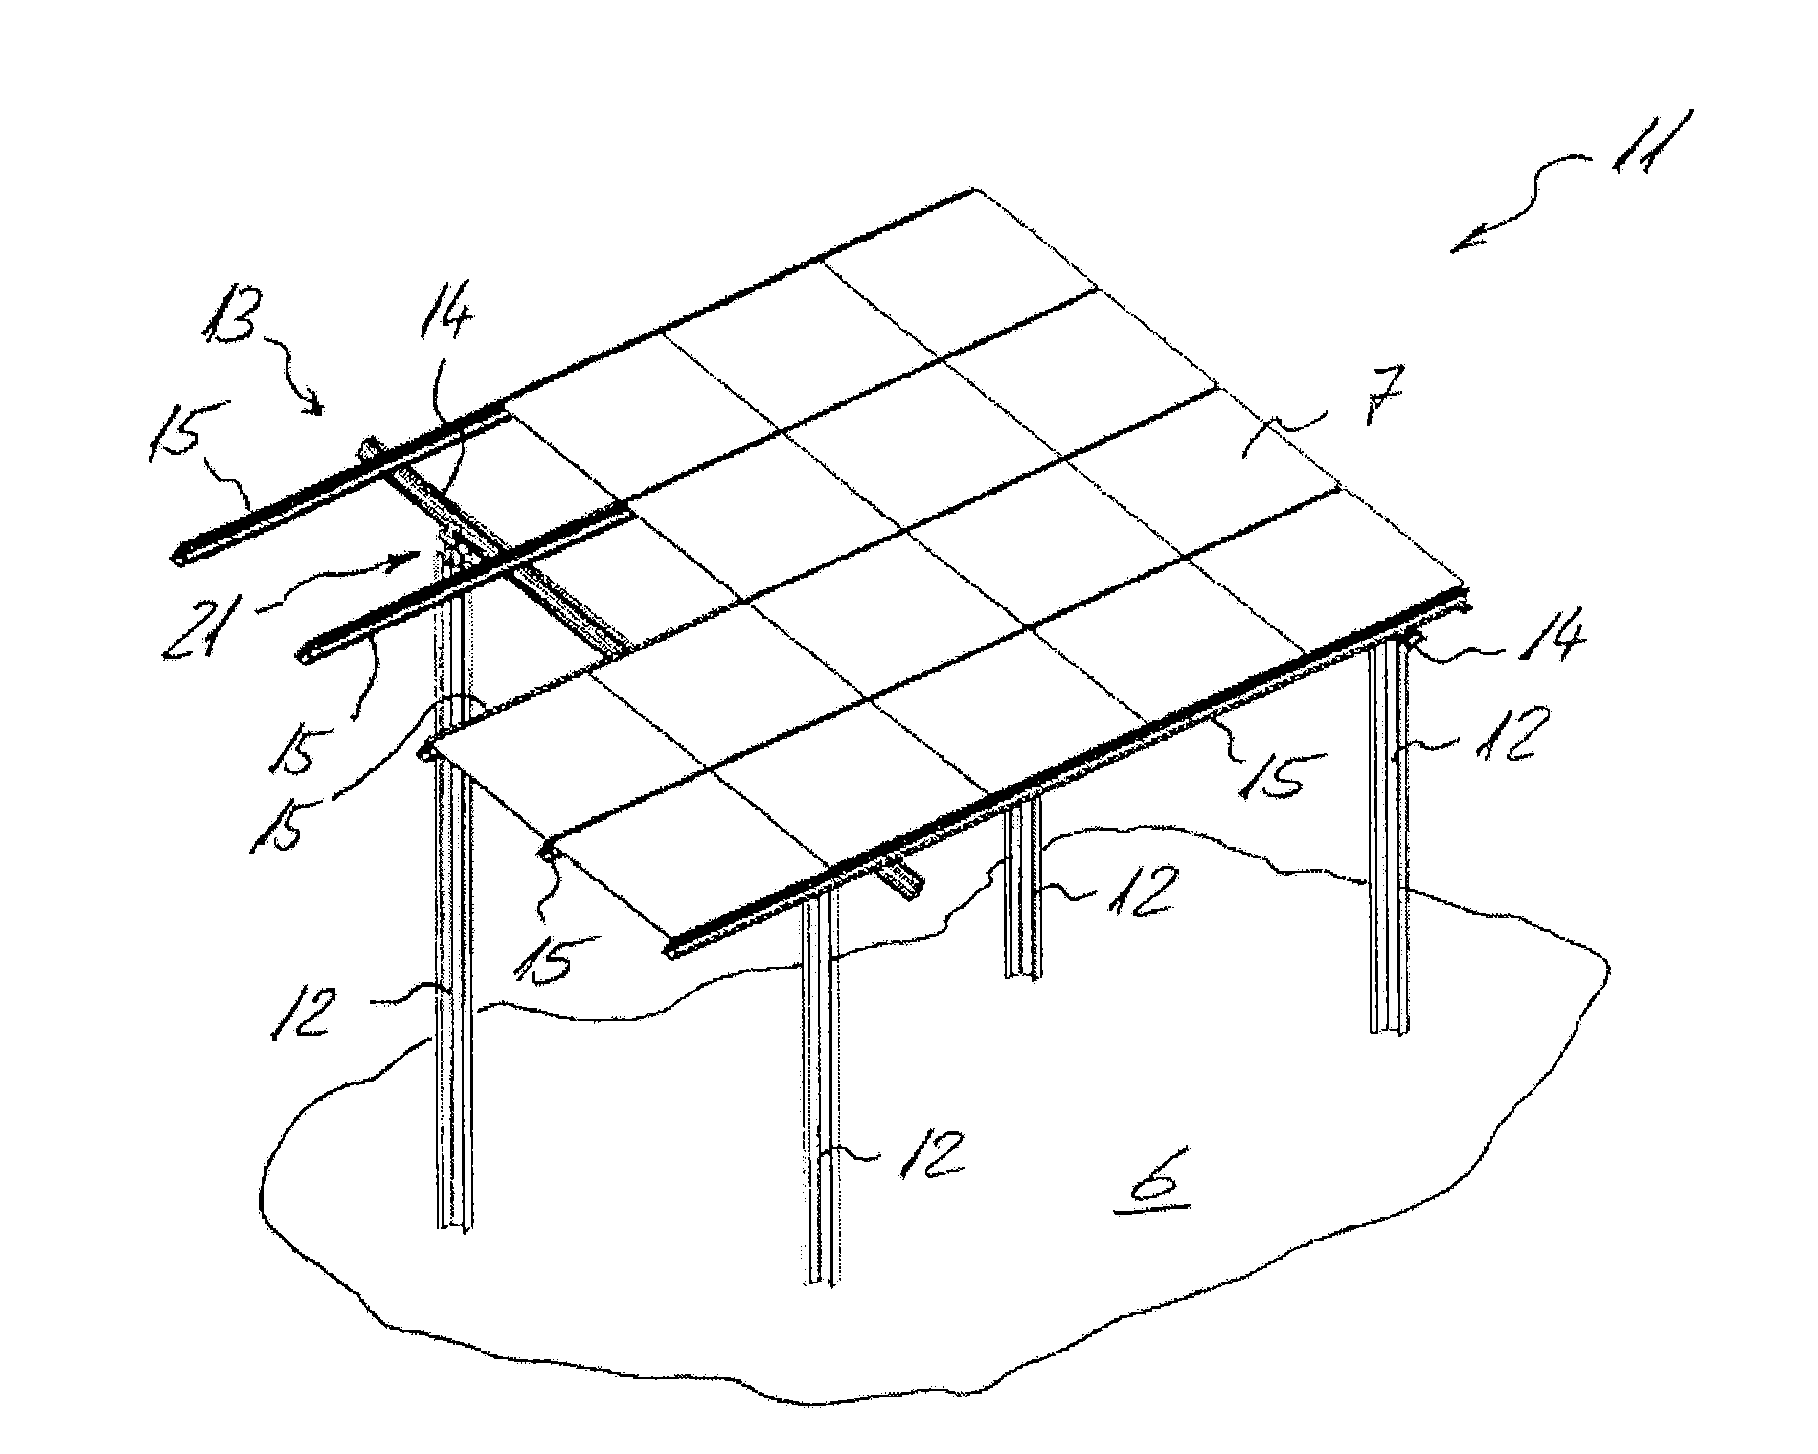 Connecting device for a frame structure